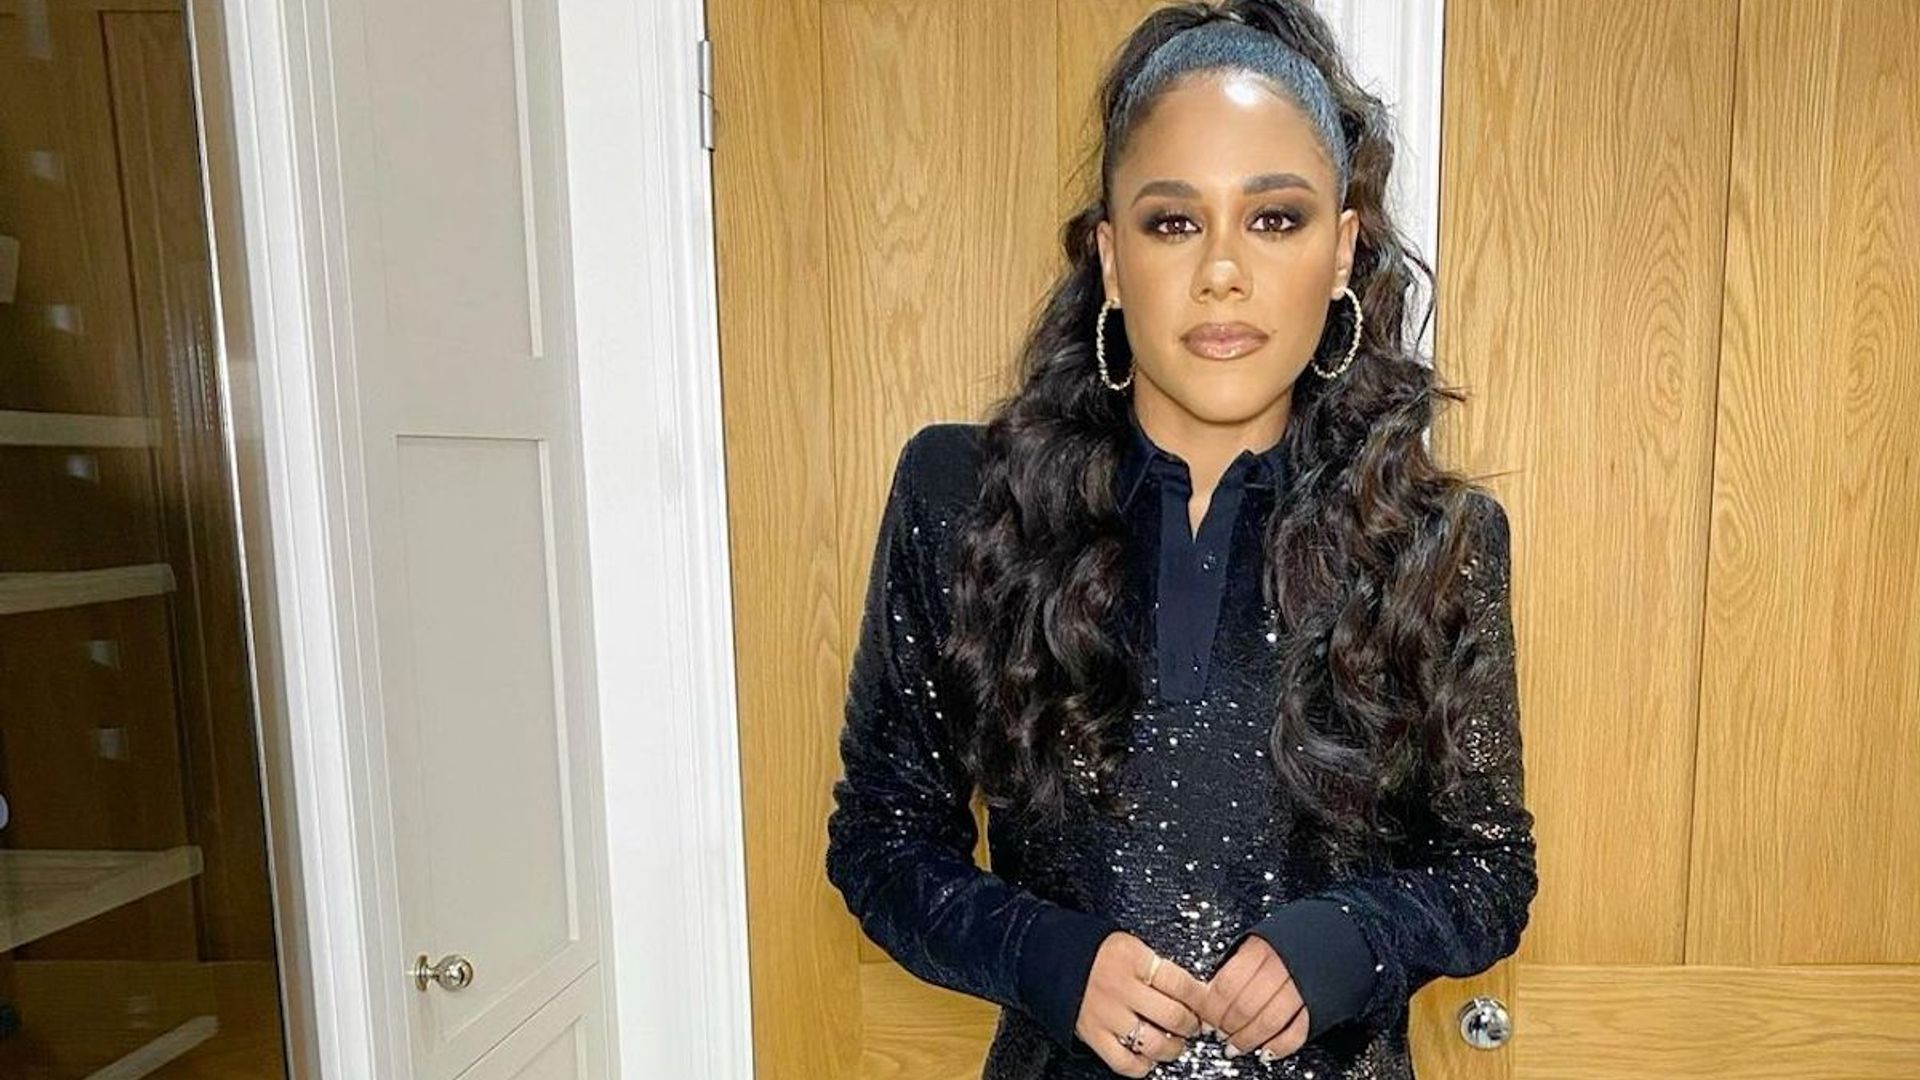 Alex Scott looked extra stunning in sequins at the Attitude Awards